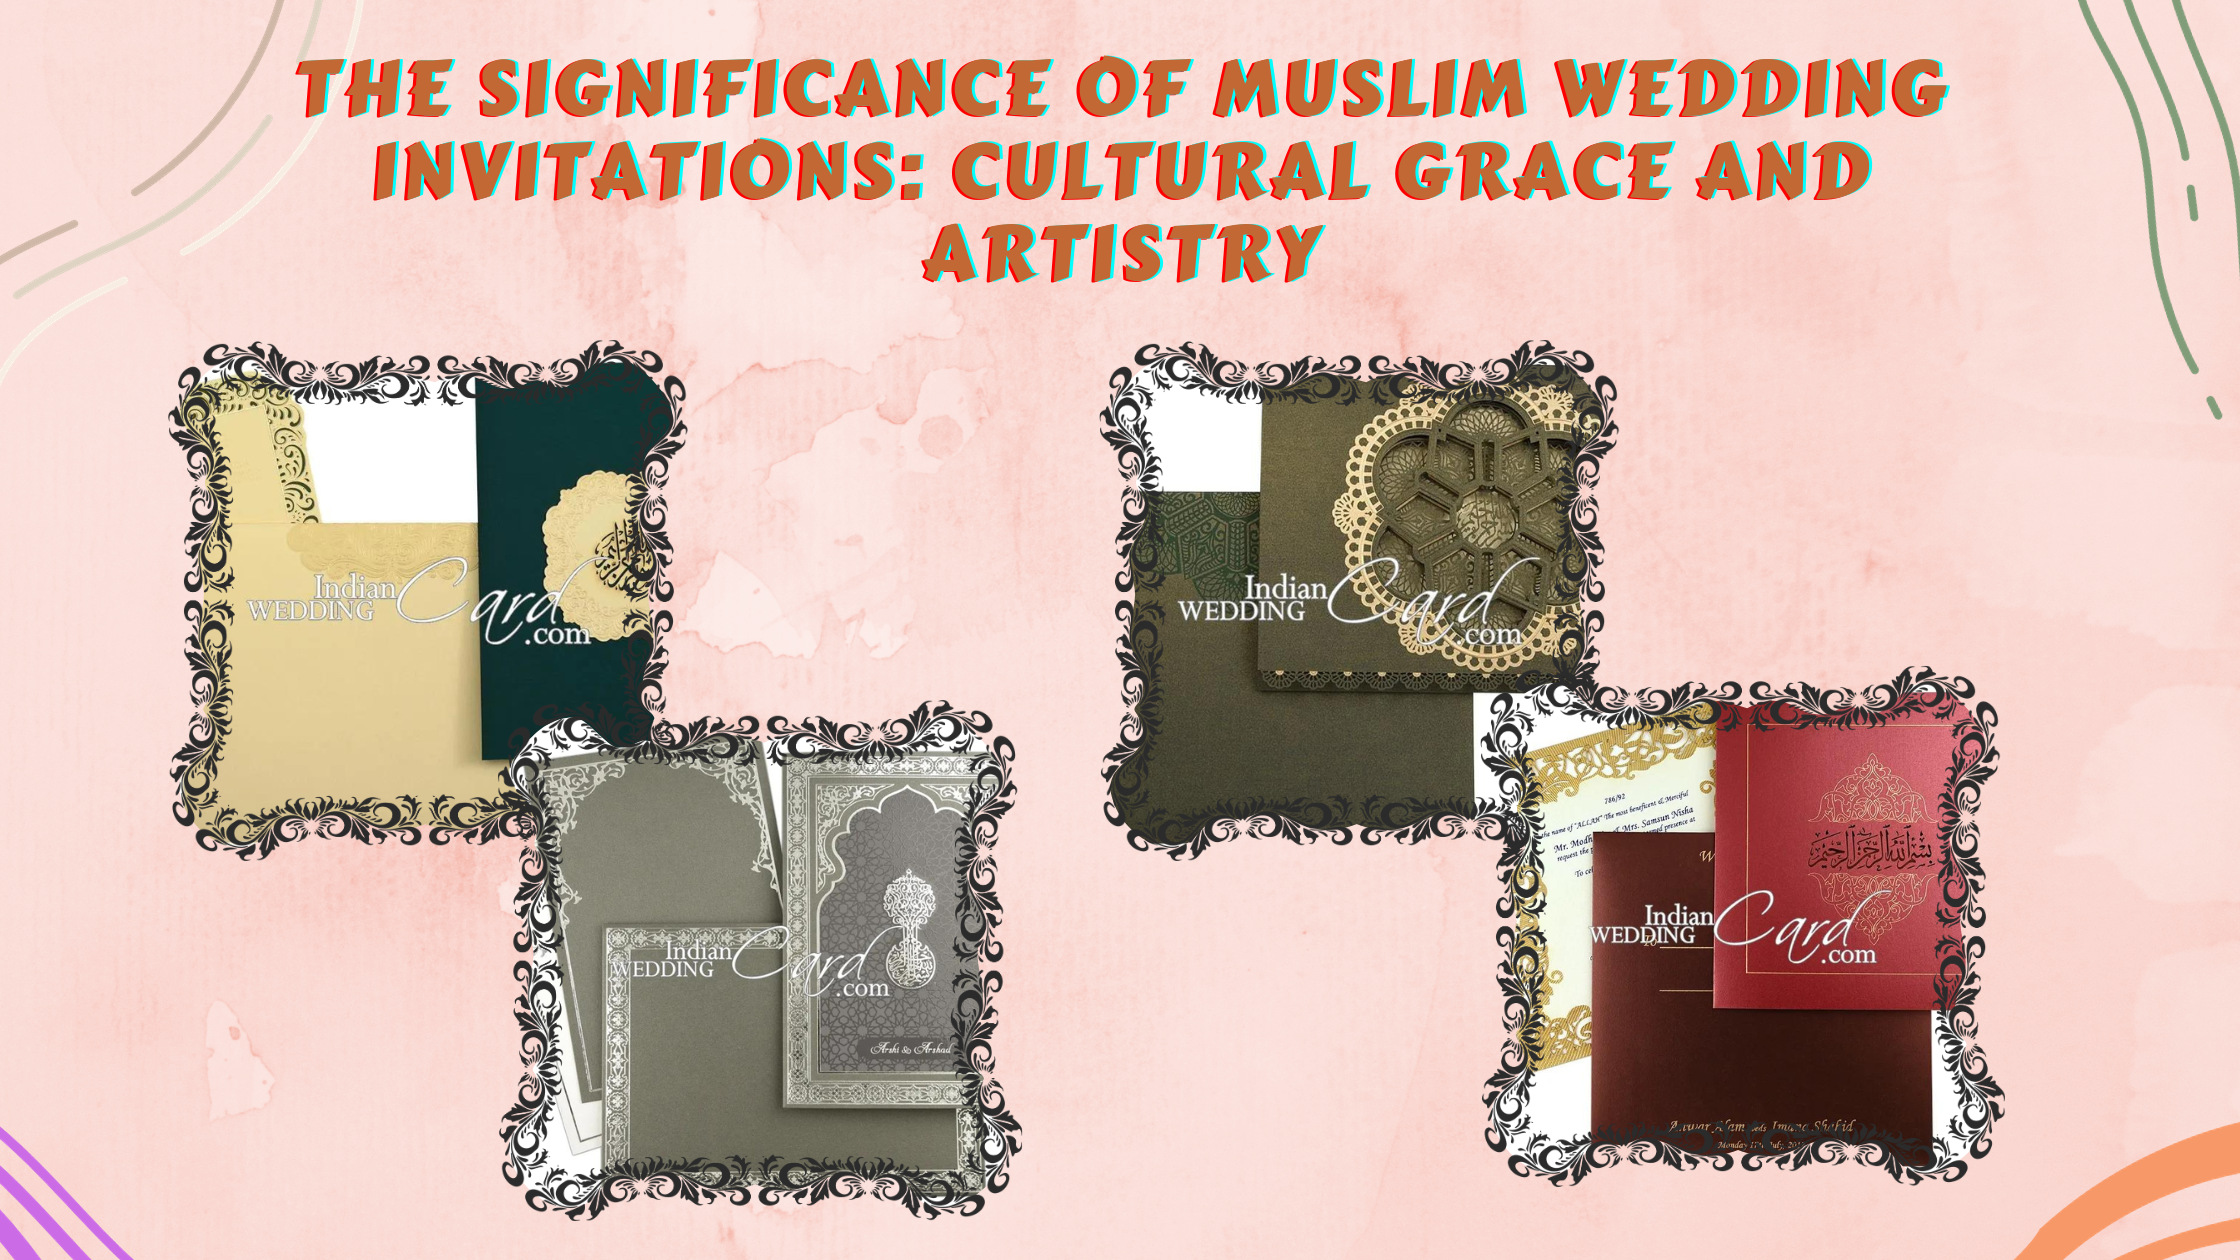 The Significance of Muslim Wedding Invitations: Cultural Grace and Artistry